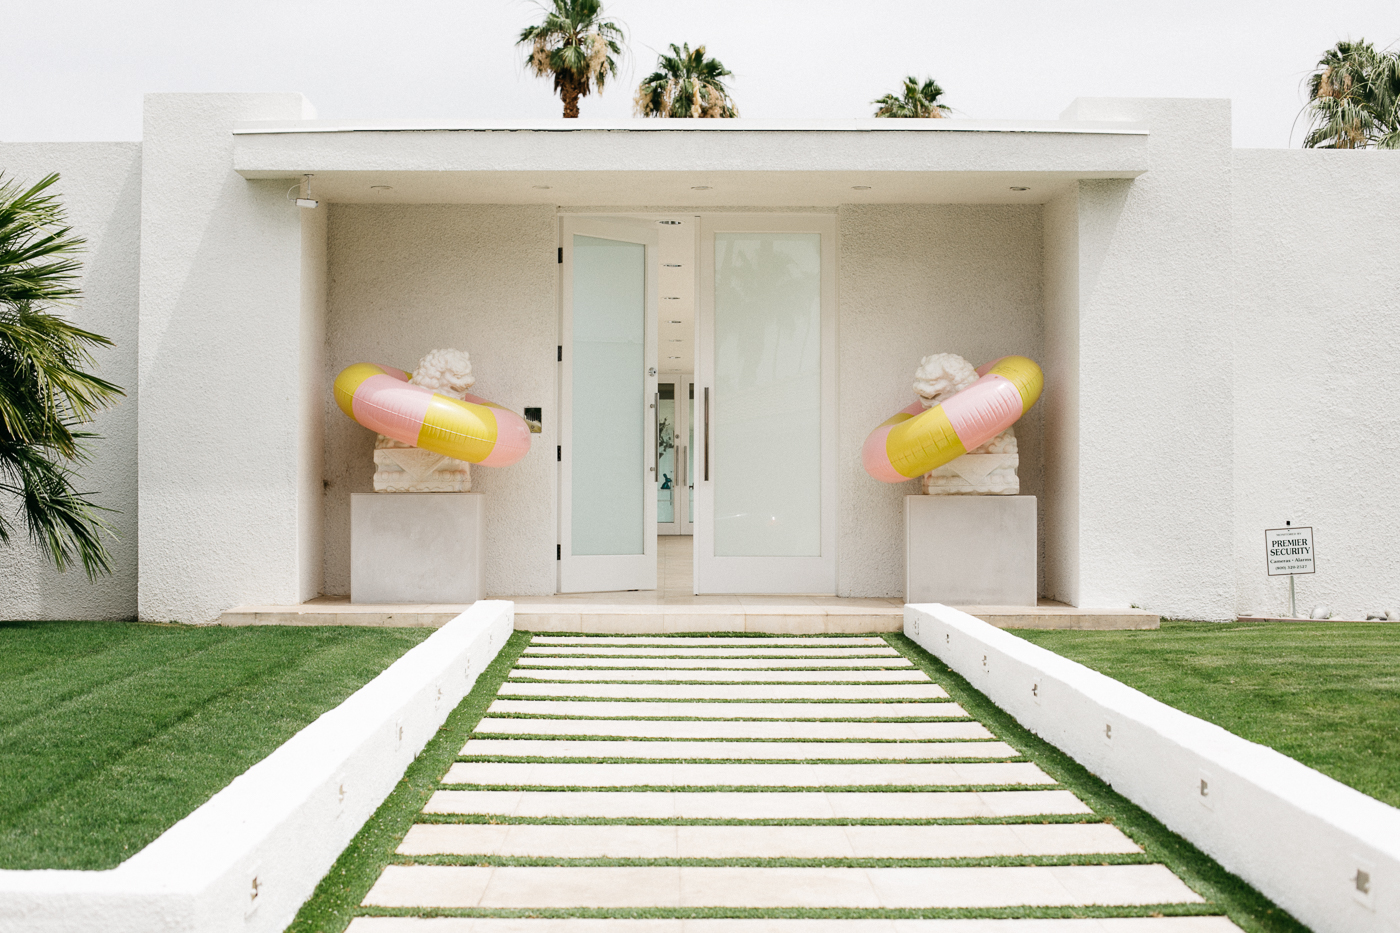 Things To Do In Palm Springs: Modernism, Cool Doors & Houses | Bikinis & Passports